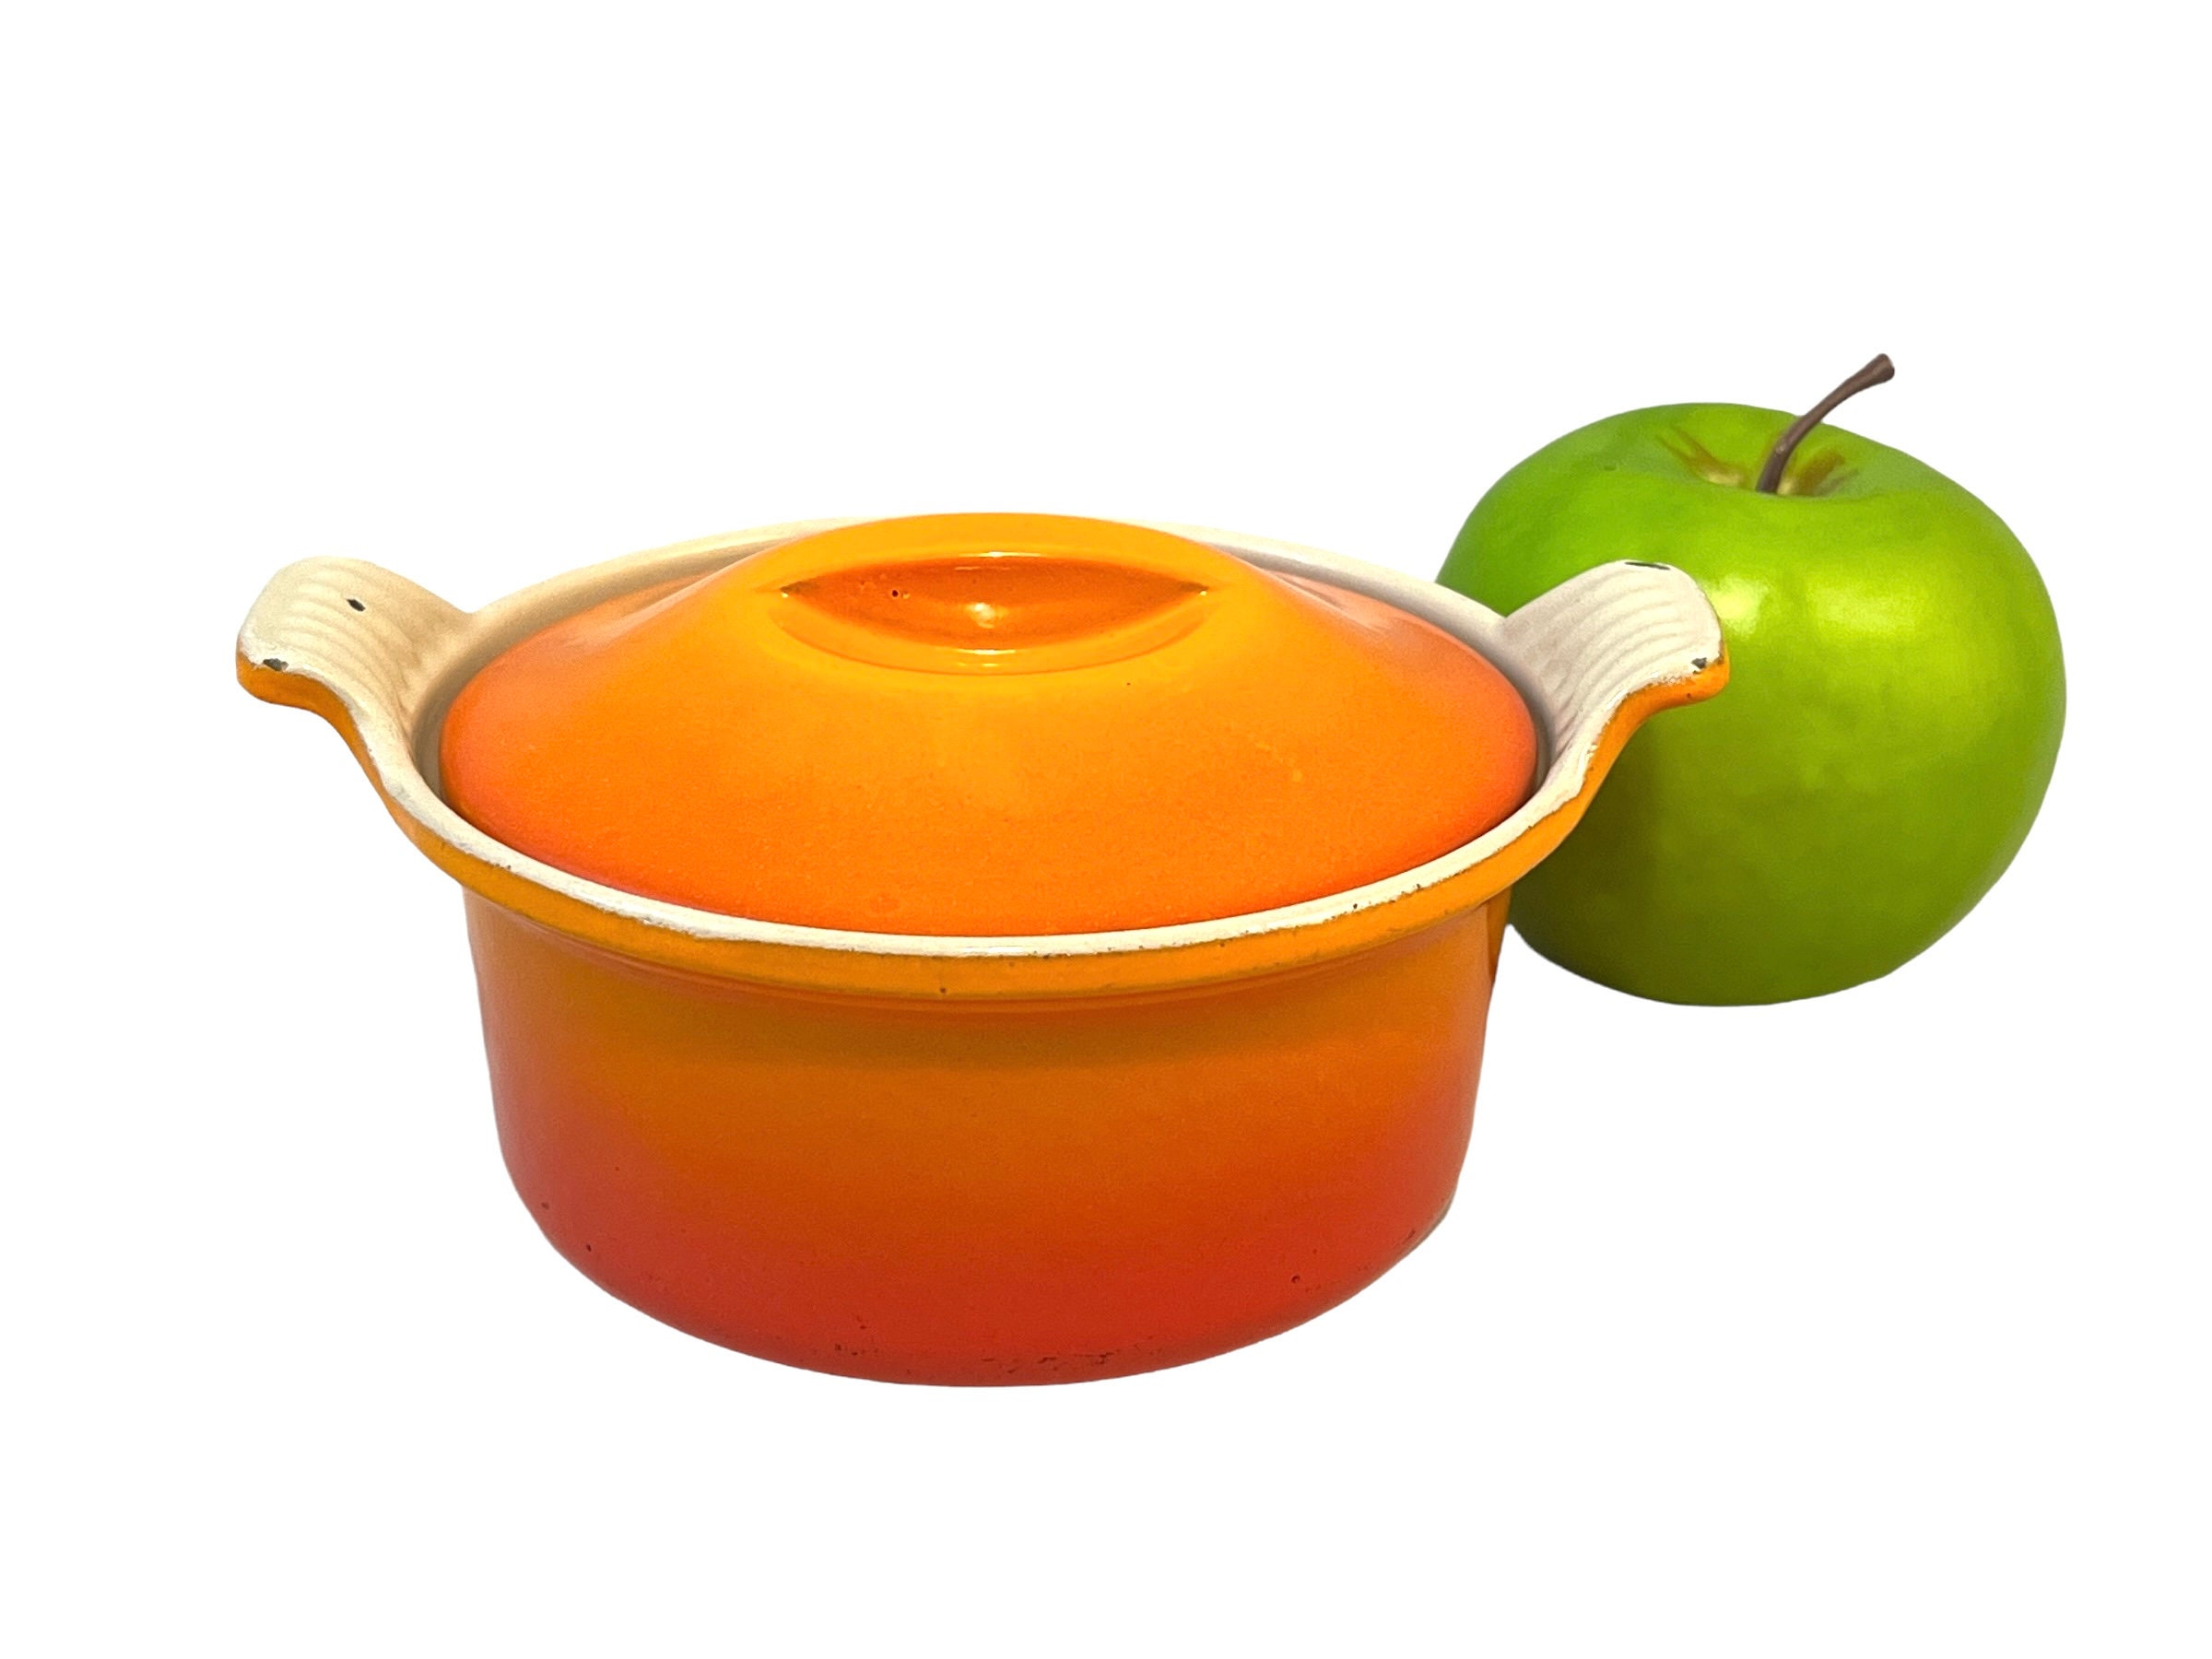 Vintage Le Creuset Sauce Pan in the Iconic Volcanic Orange 1970's Classic  Cookware. Size 20 With Lid. -  Norway